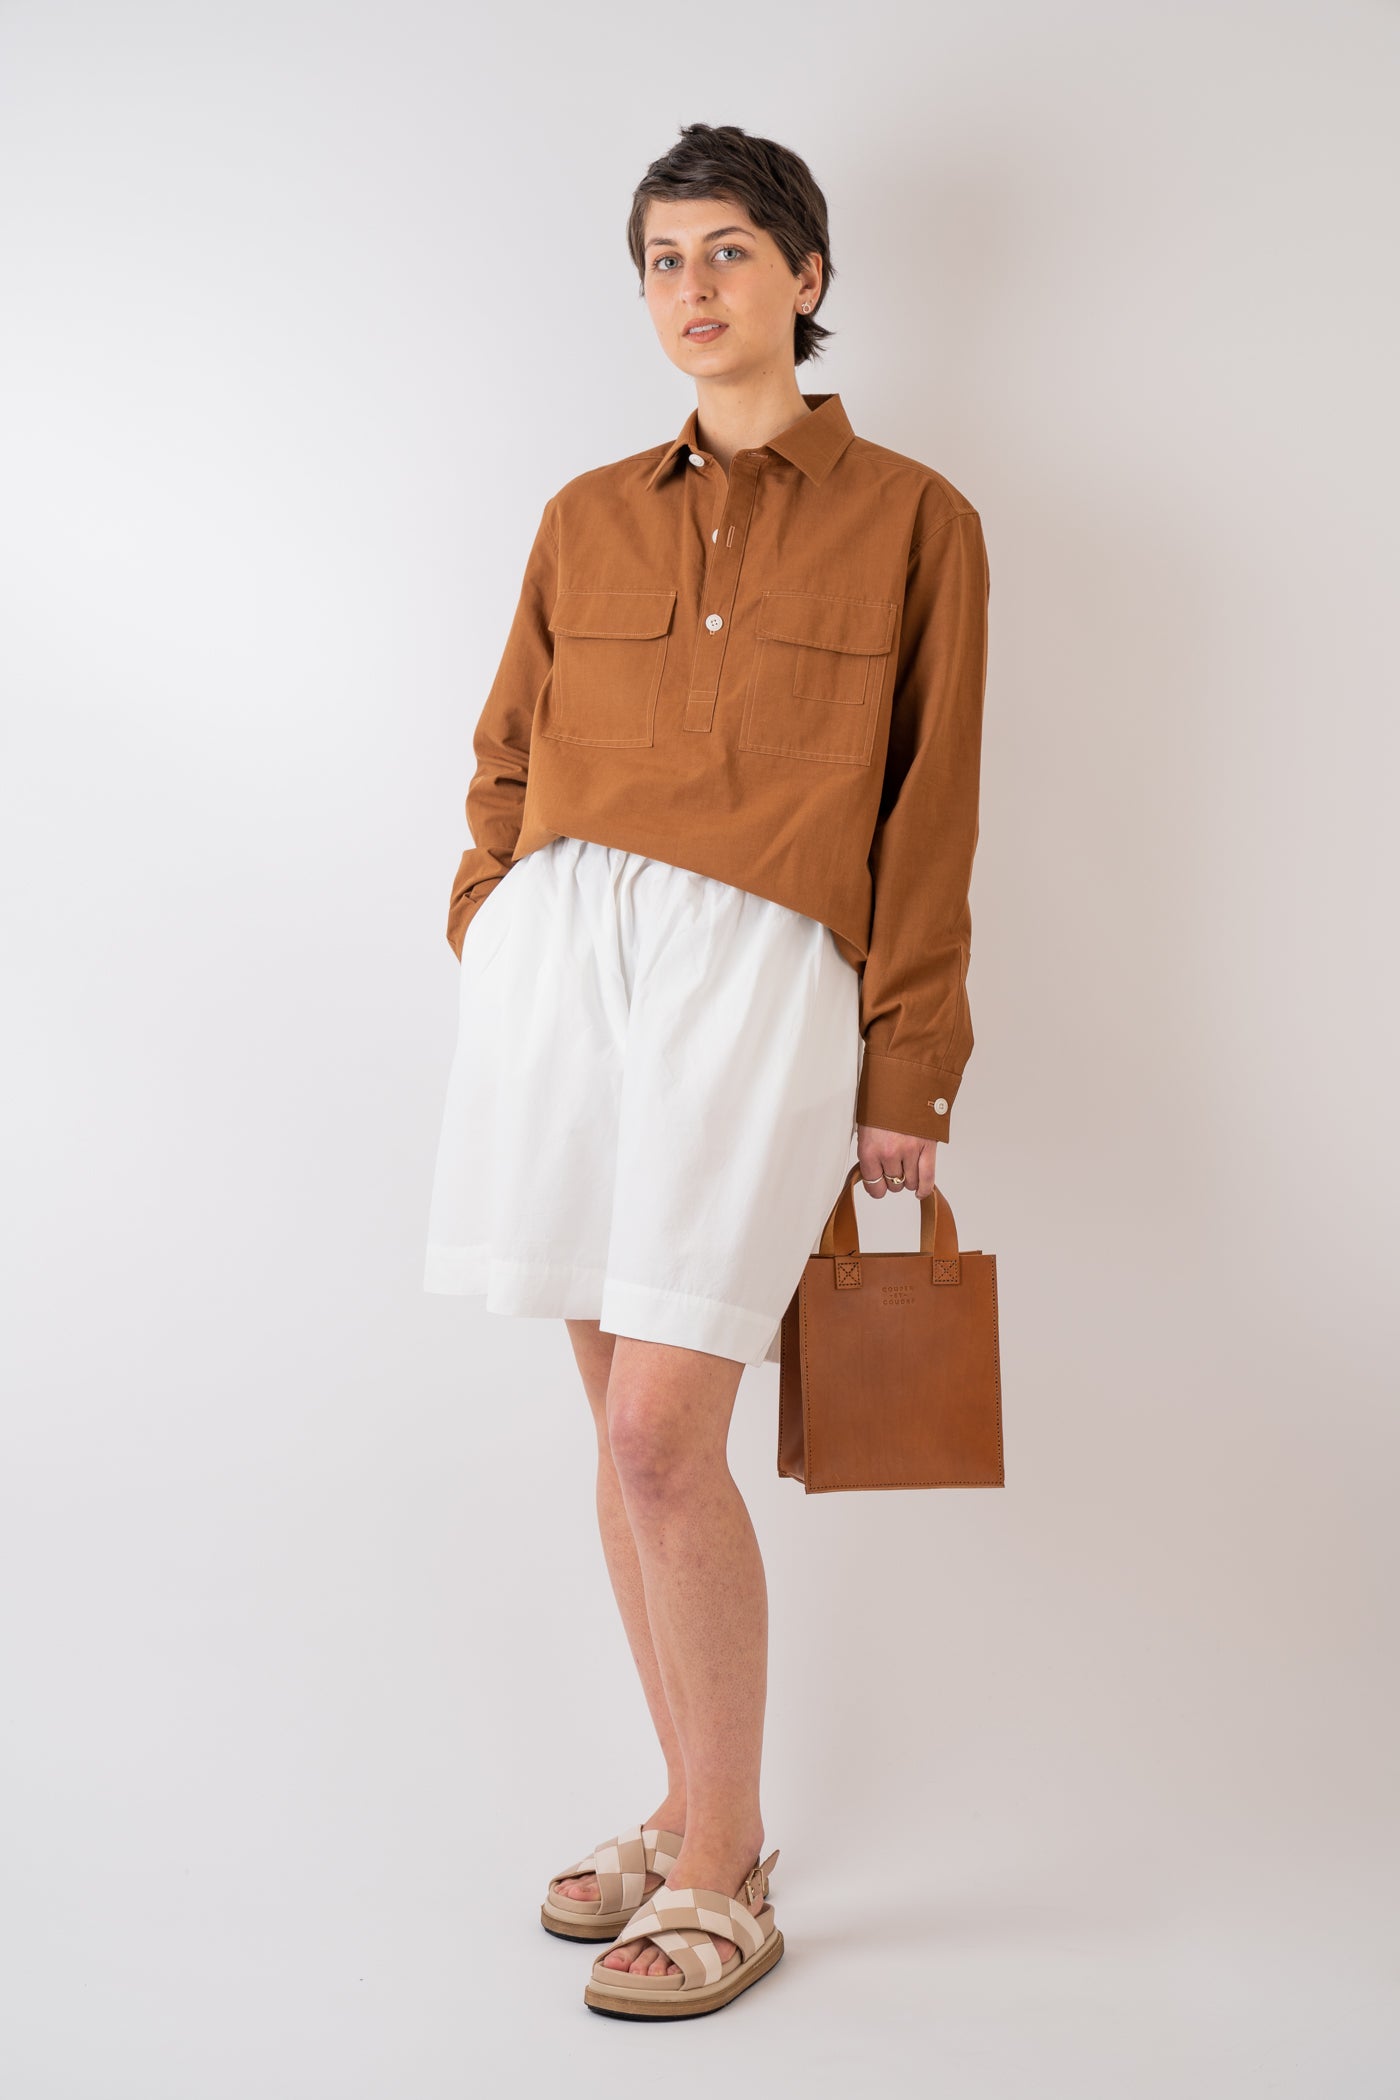 Xi Atelier Organic Cotton Frankie Unisex Shirt in Rusty styled with Couper et Coudre Jour Bag in Cognac